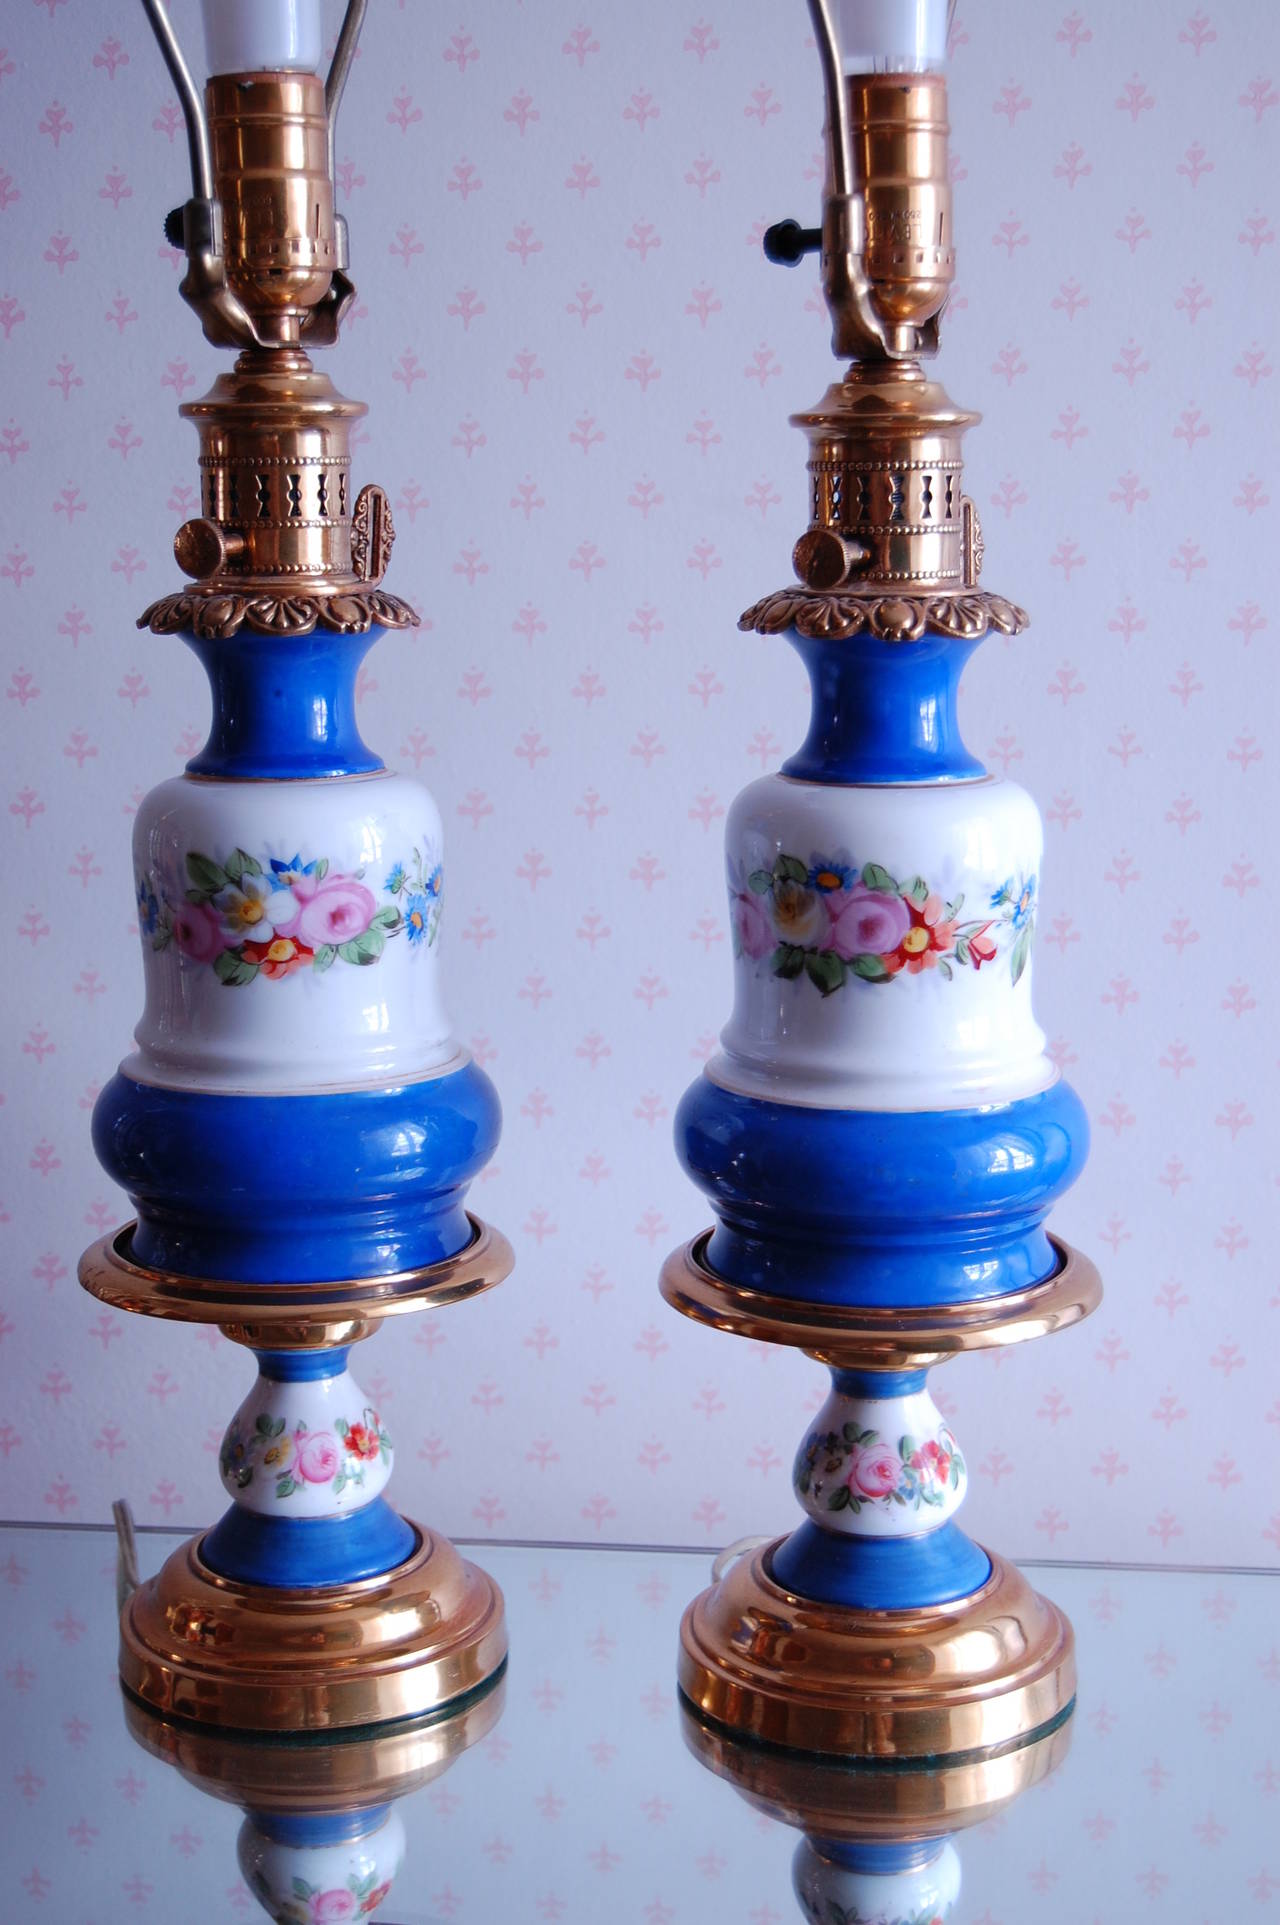 Mid-19th Century Pair of Floral Decorated French Porcelain Oil Lamps, Likely Sevres, circa 1850 For Sale